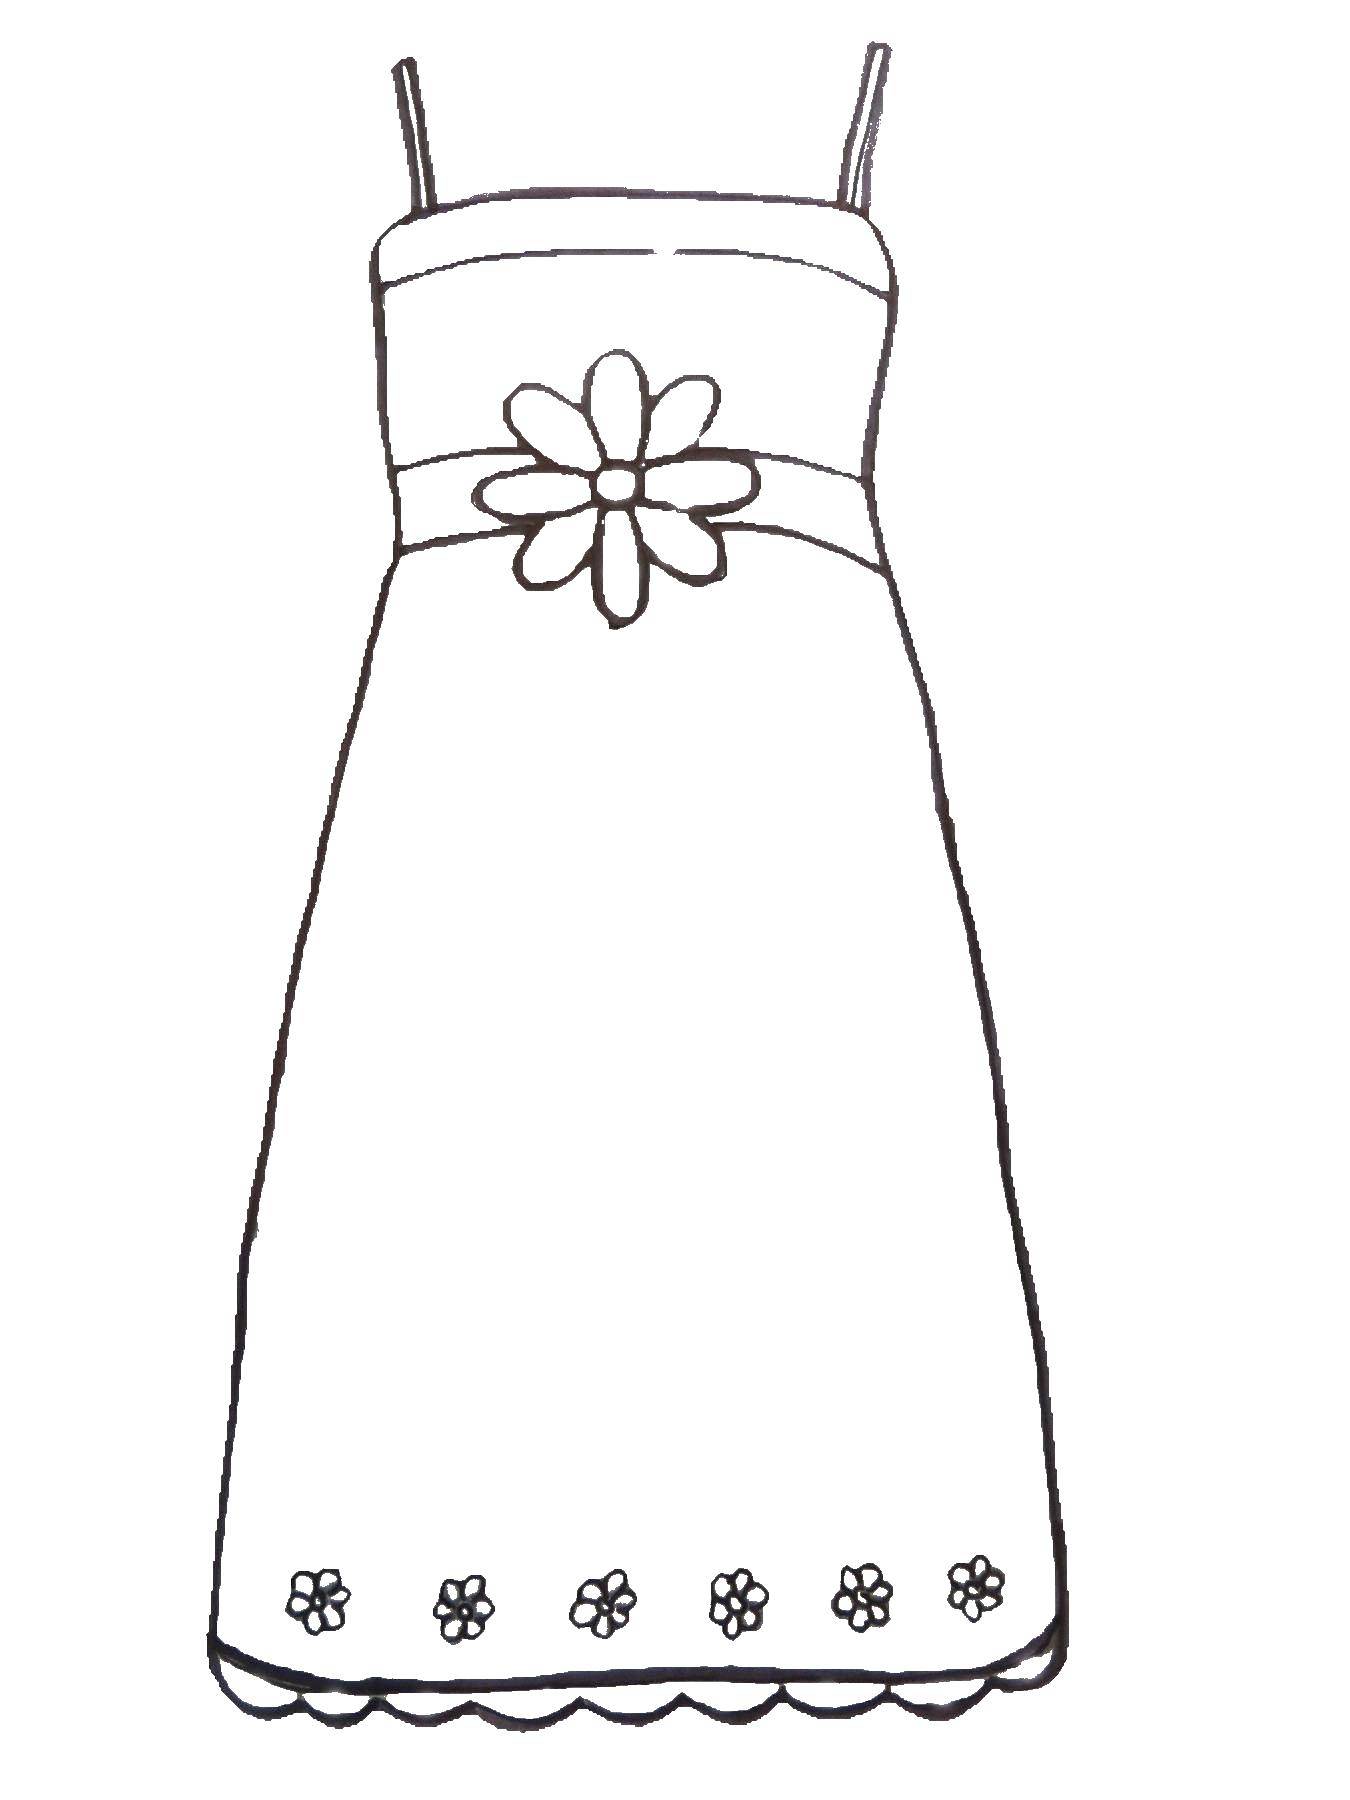 Coloring Dress with flower. Category Dress. Tags:  dress, flower.